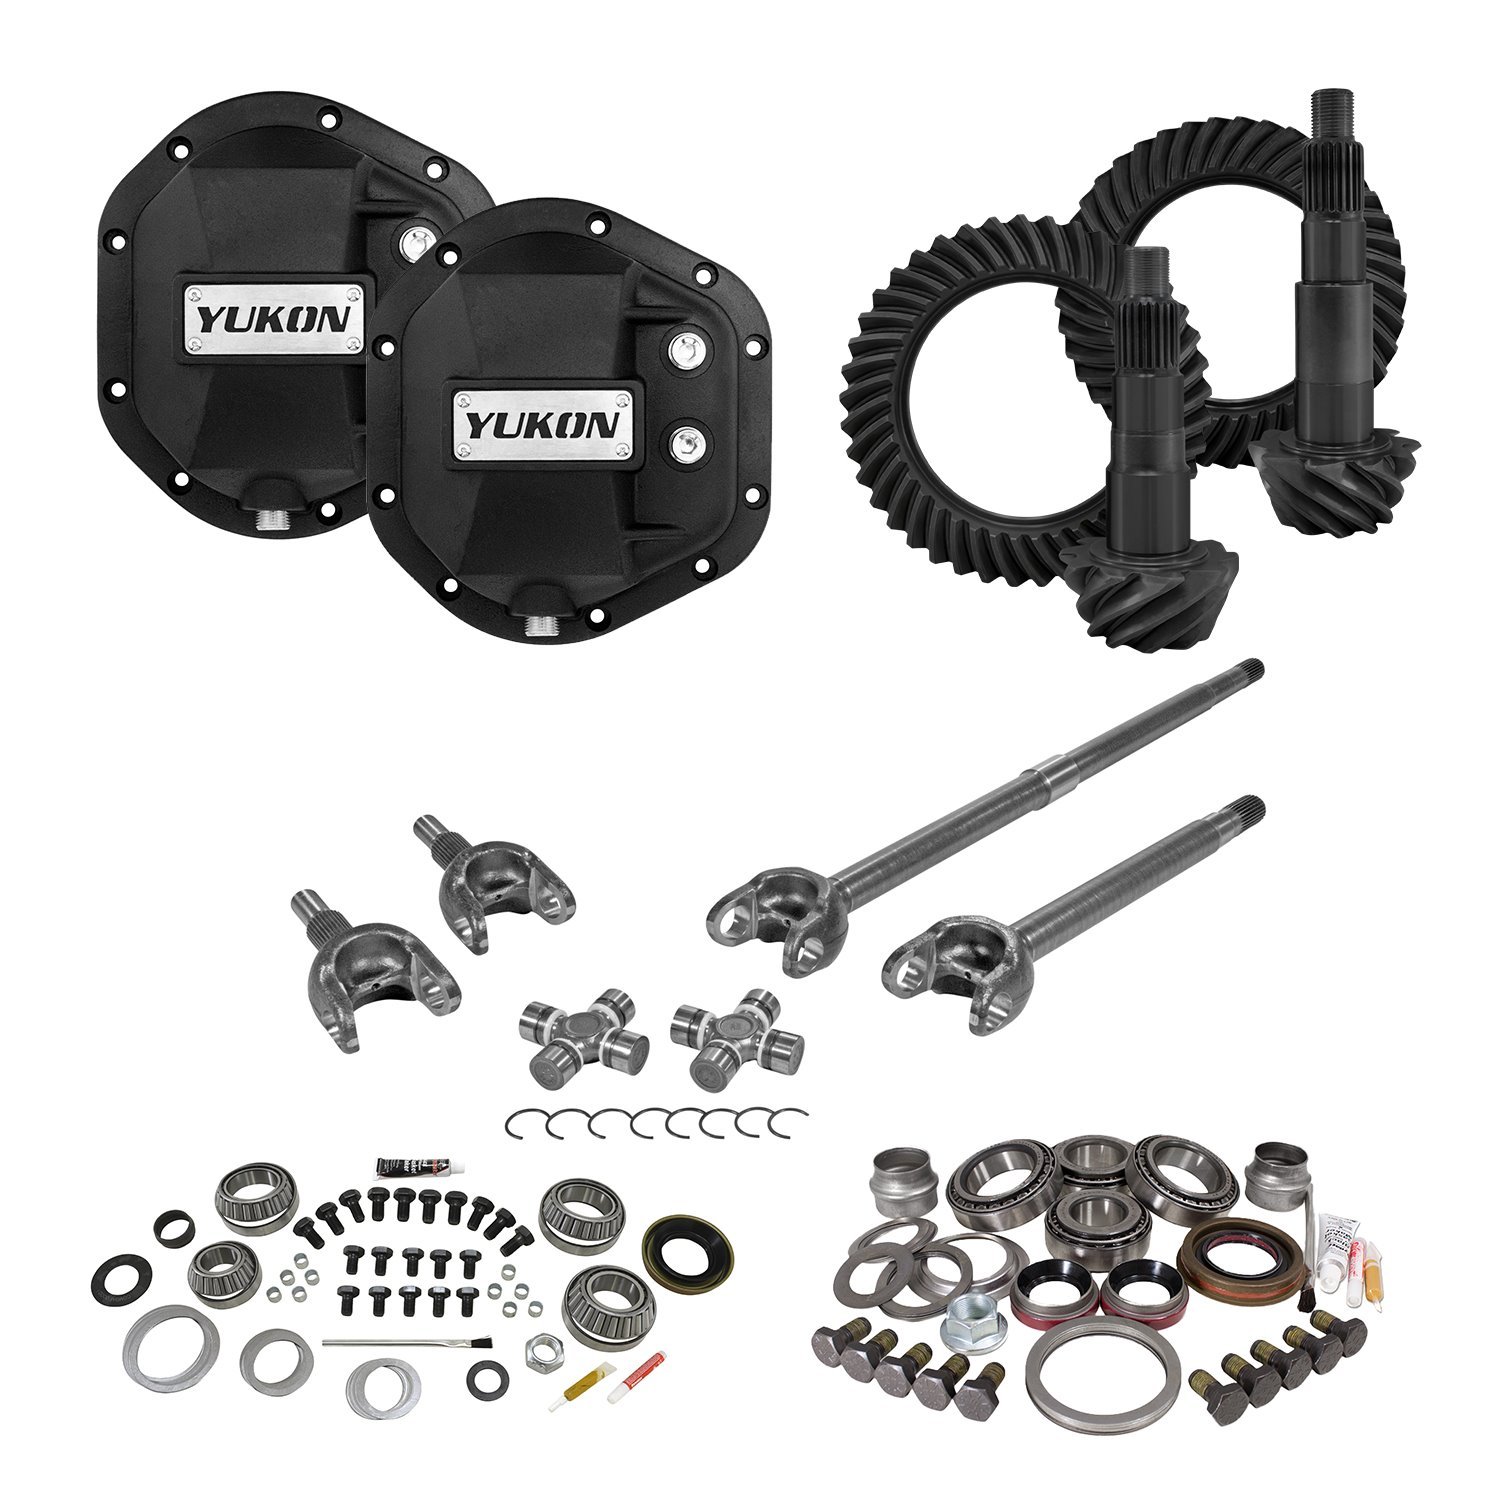 Stage 3 Jeep Jk Re-Gear Kit W/Covers, Front Axles, Dana 44, 4.88 Ratio